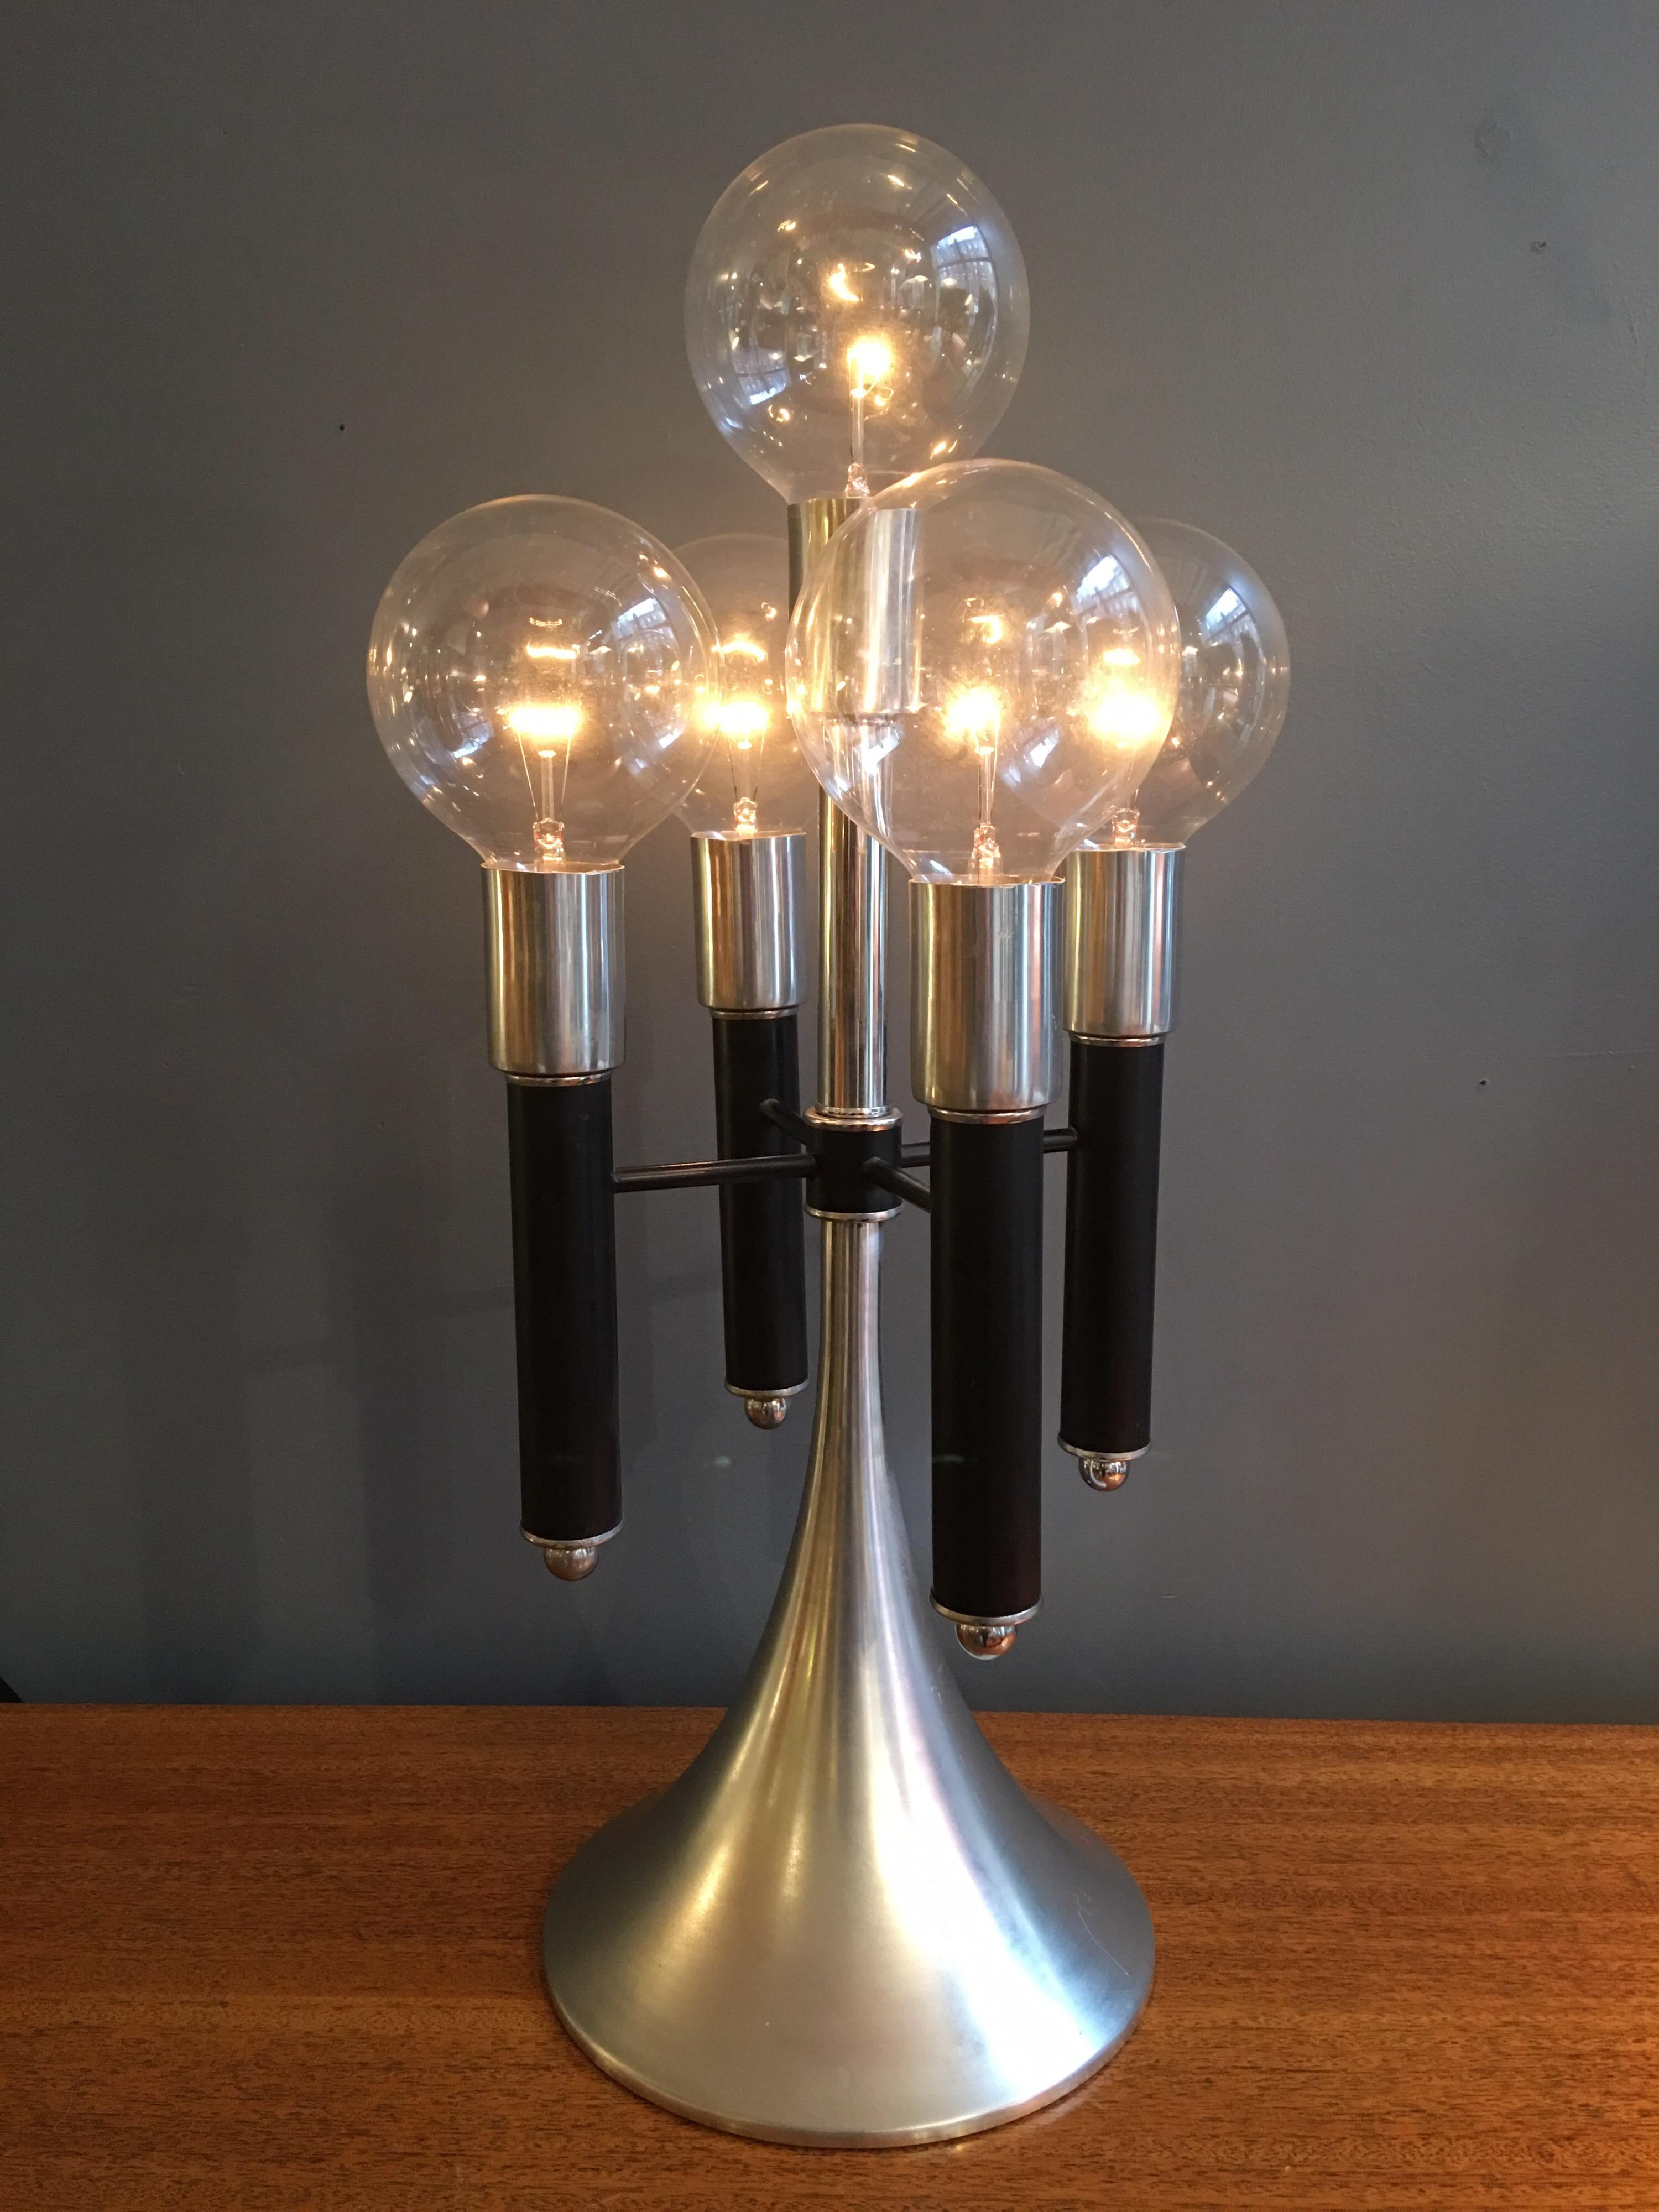 1970s Mod aluminum table lamp with 5 clear vanity bulbs. Round base that tapers up to 5 stems. On off switch with built in dimmer.